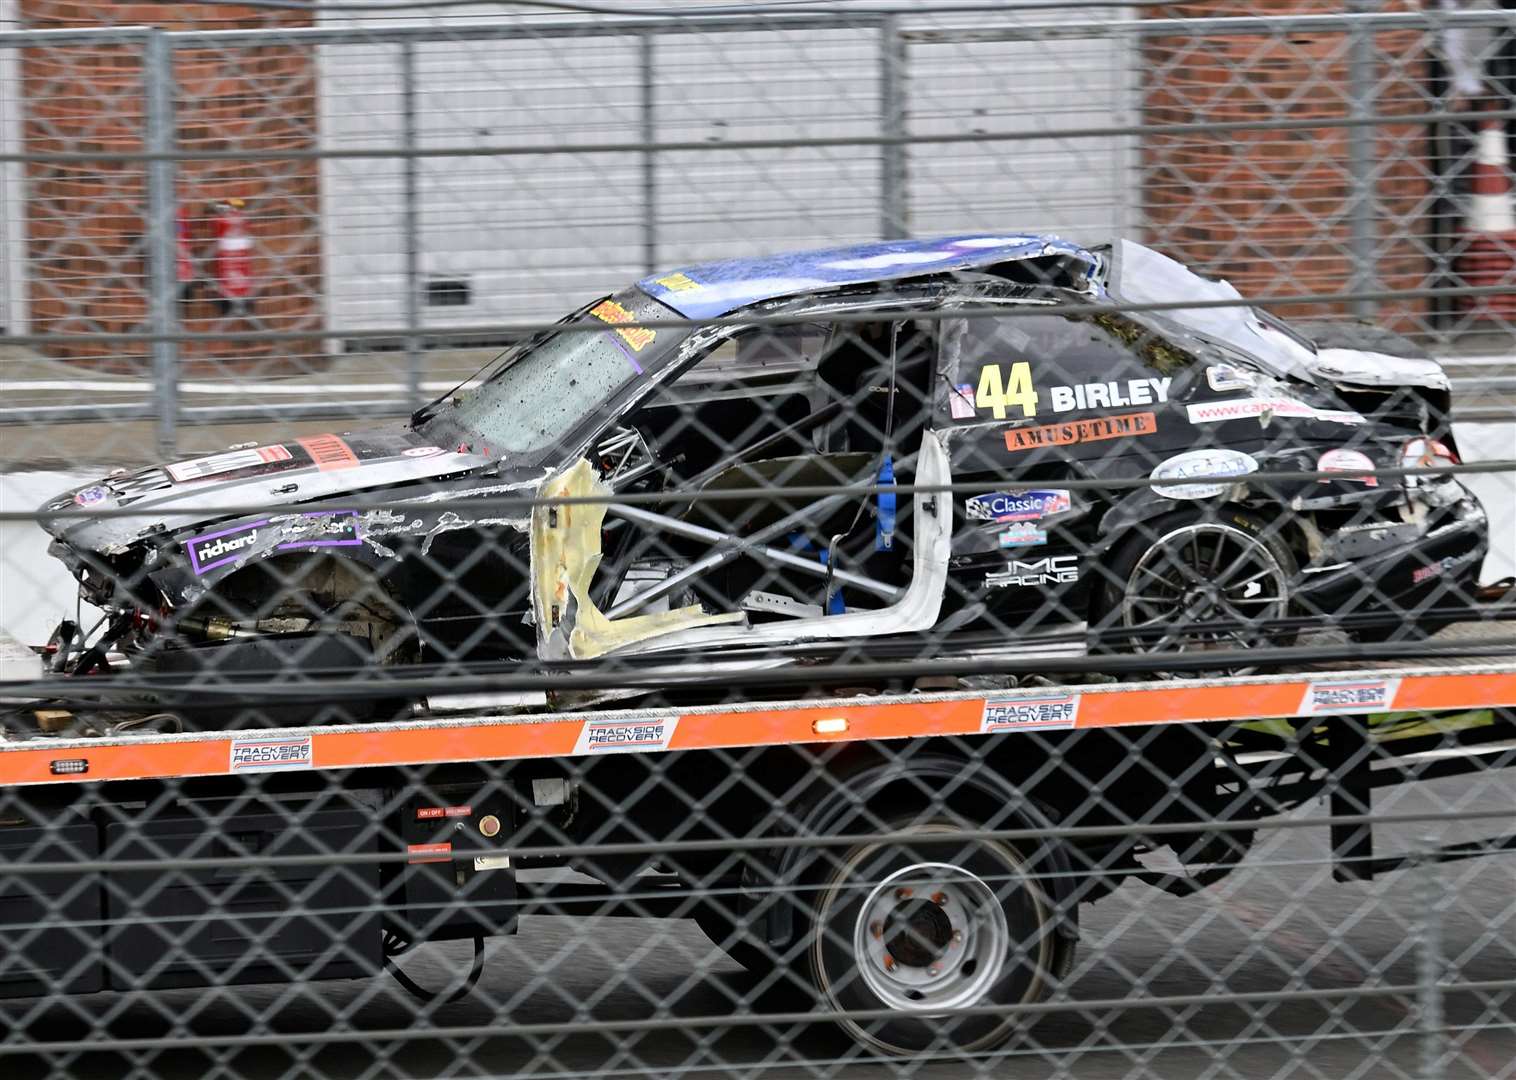 Birley had won the first Classic and Modern Motorsport Club's Super Saloons race on Saturday but was involved in a big accident during race two on Sunday. Picture: Simon Hildrew